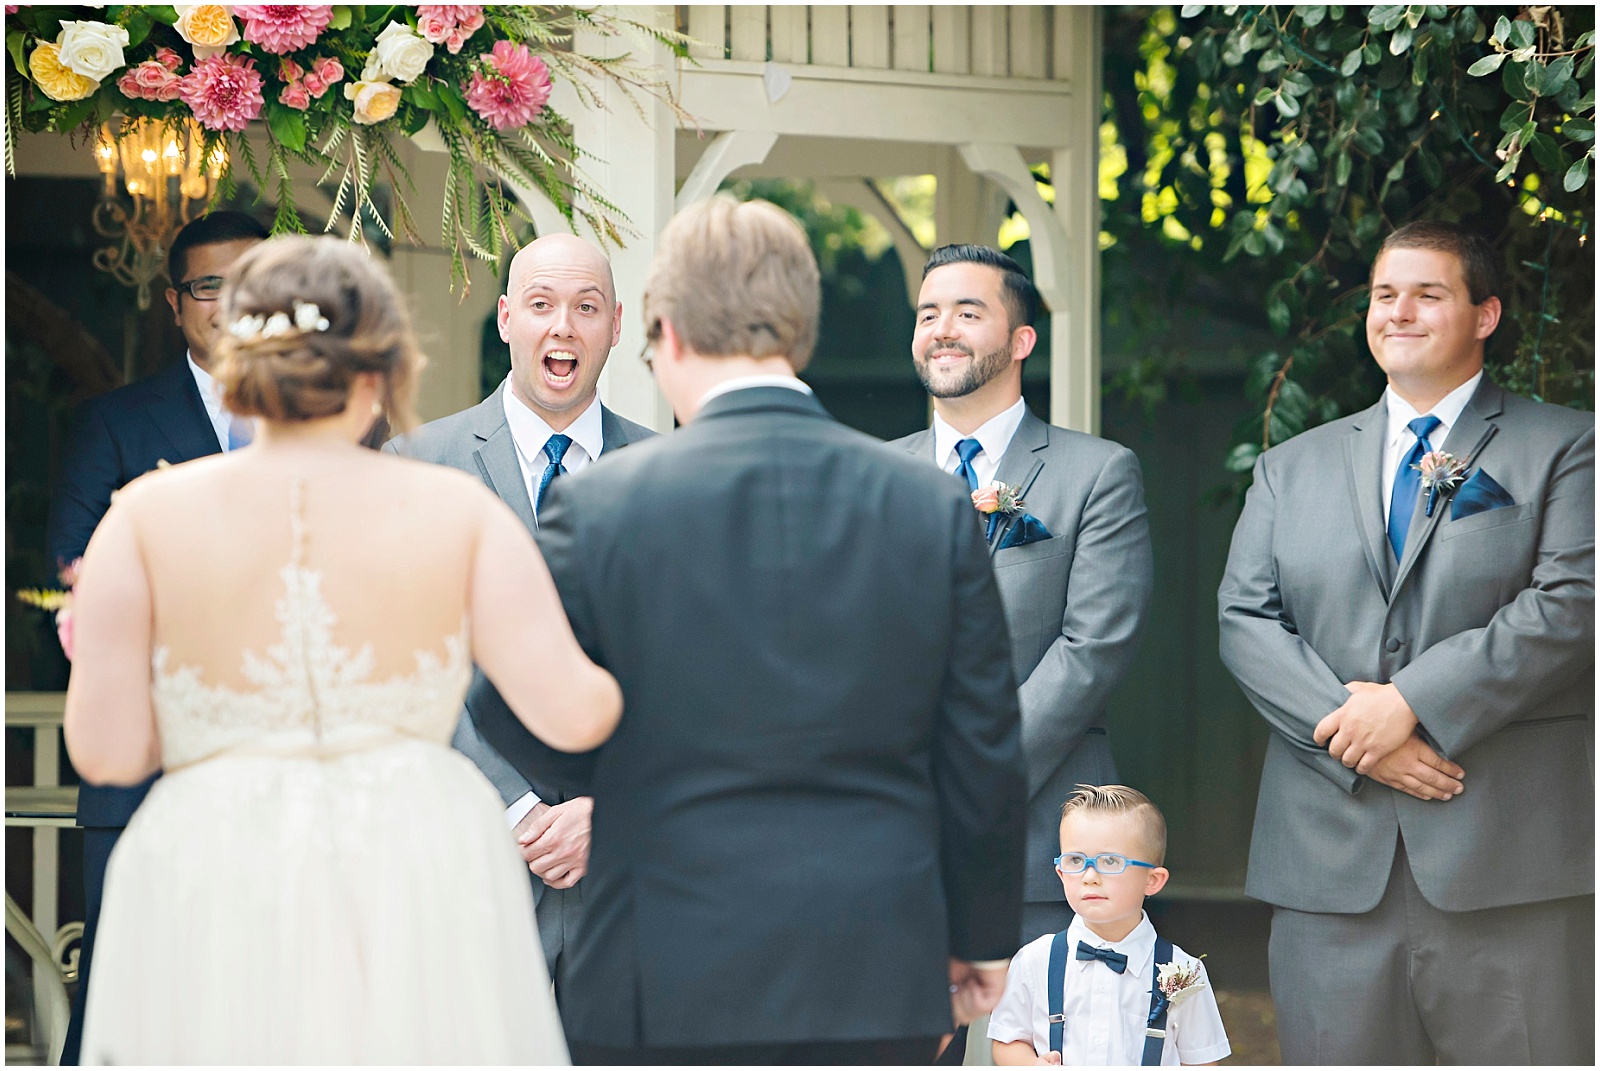 Groom's reaction during wedding ceremony at Christmas House_Photography by Mollie Jane Photography. To see more go to: ww.molliejanephotography.com